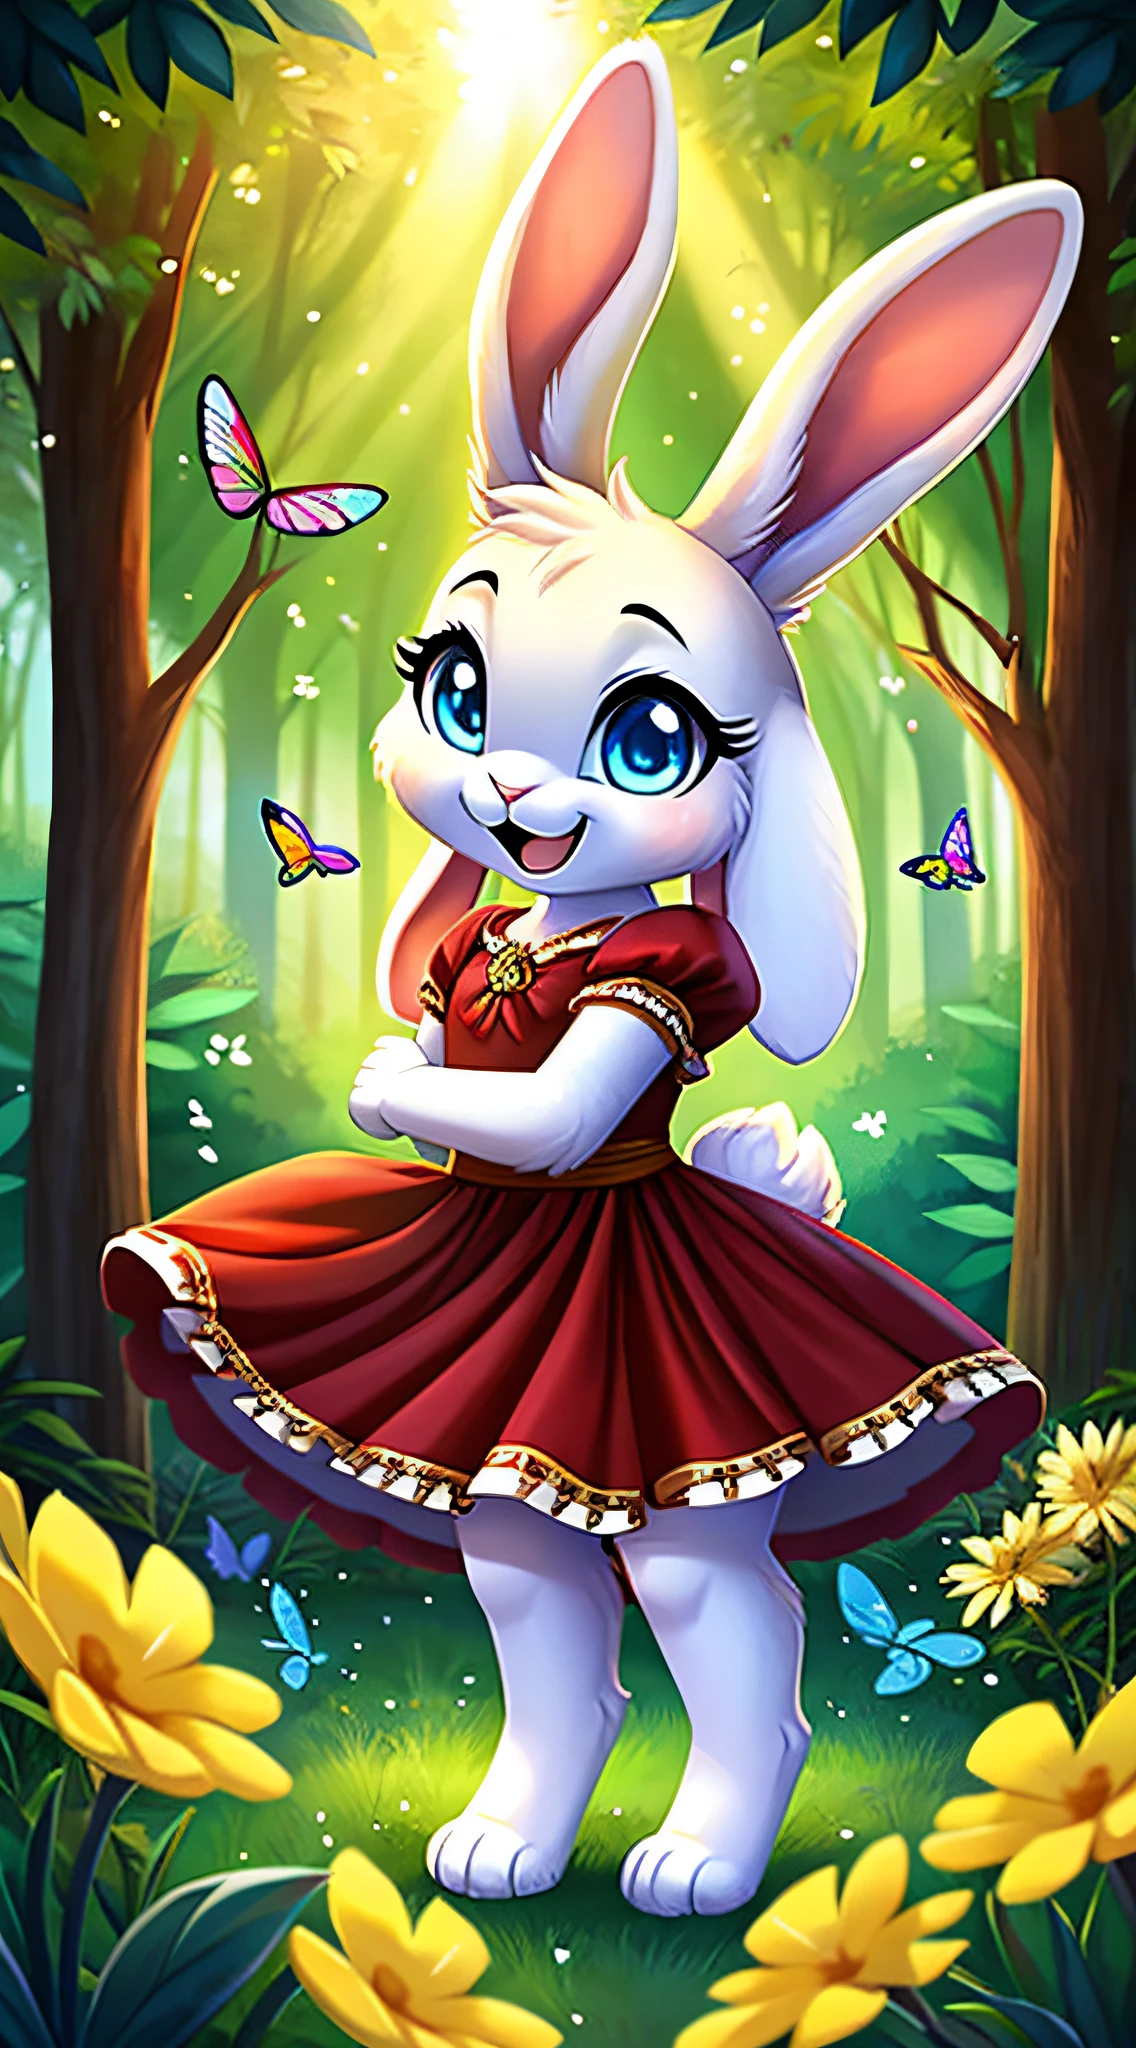 zoomed out image, fantasy style art, cute, adorable, short, tiny, little fluffy female white bunny with blue eyes, 2 extra ears, 4 ears, big floppy ears, long ears, ears perked up, raised ears, long eyelashes, poofy rabbit tail, smiling, standing on two hind feet, standing in a forest, wearing a red frilly dress, big expressive smile, open mouth, wide eyes, excited eyes, excited face, stunning visuals, sunlight coming through the trees, colorful flowers scattered in the bushes, colorful butterflies flying around, digital illustration